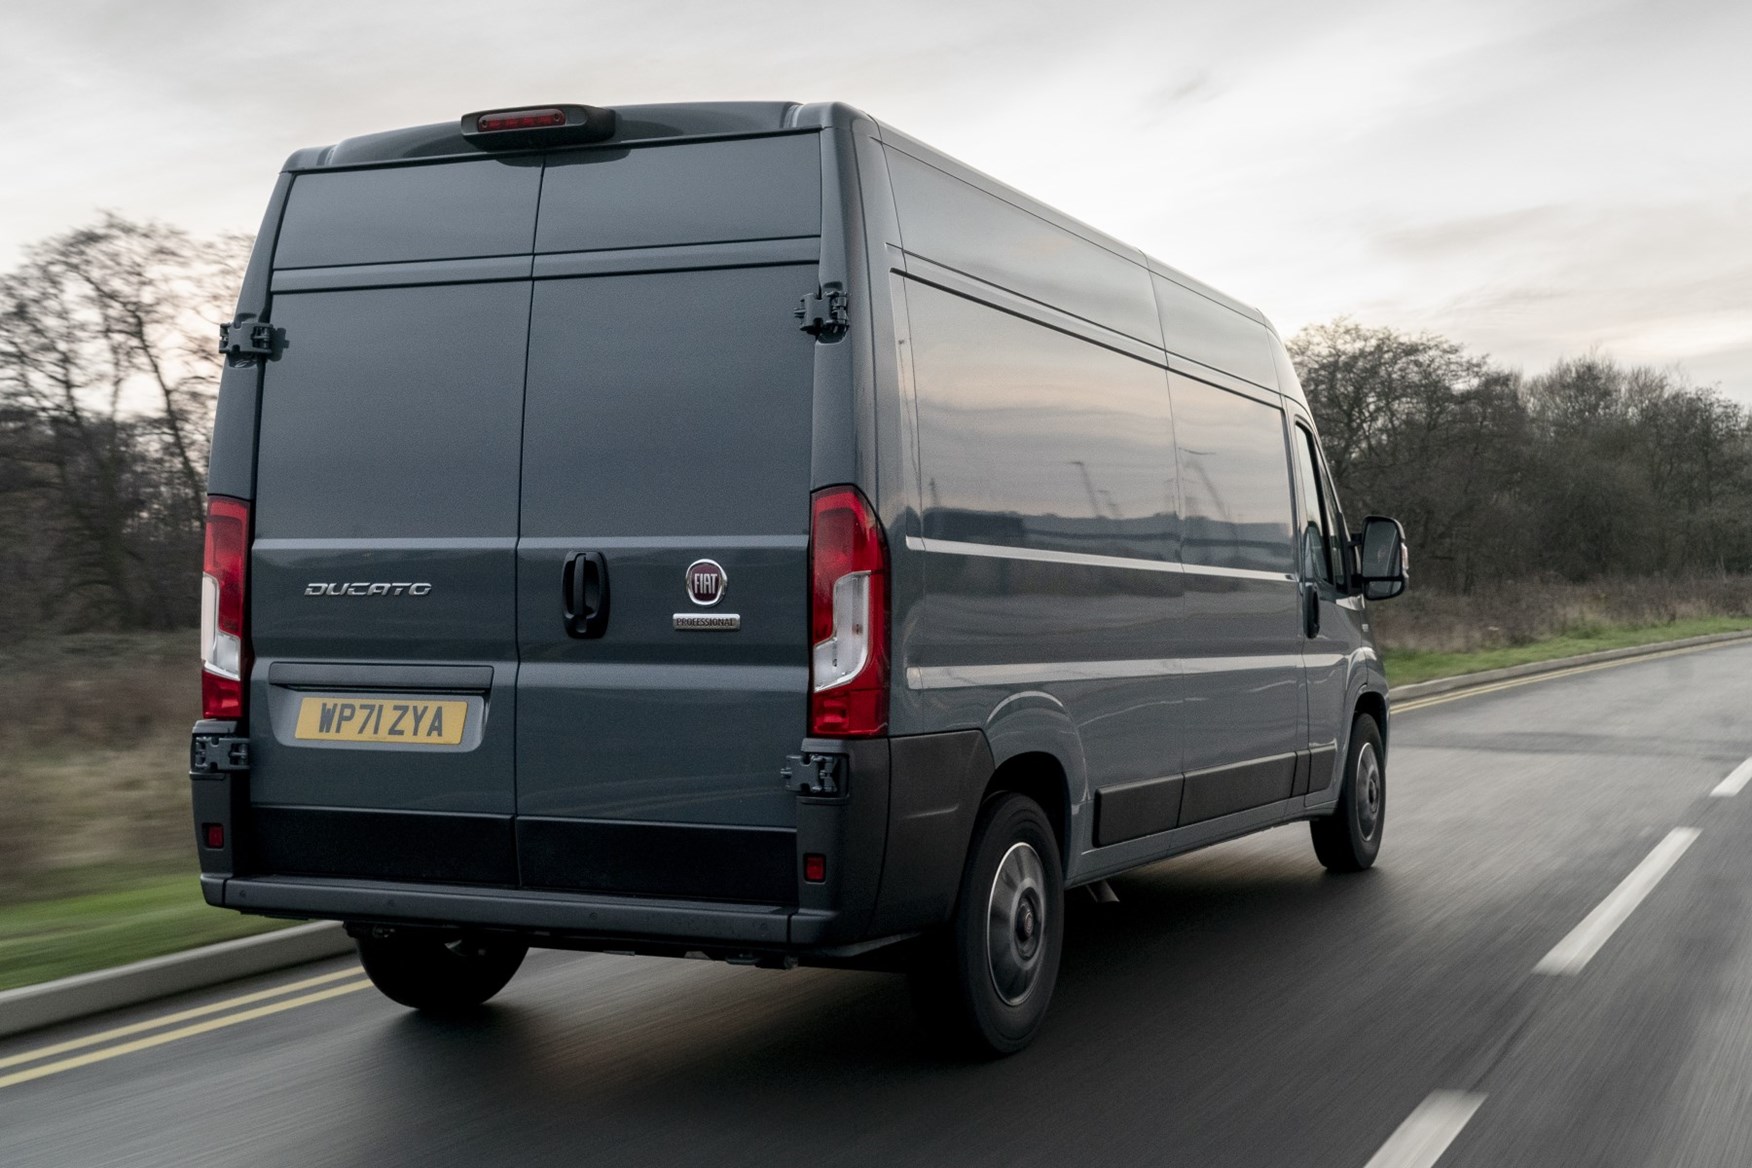 Fiat E-Ducato review: There's less stress driving in Fiat's